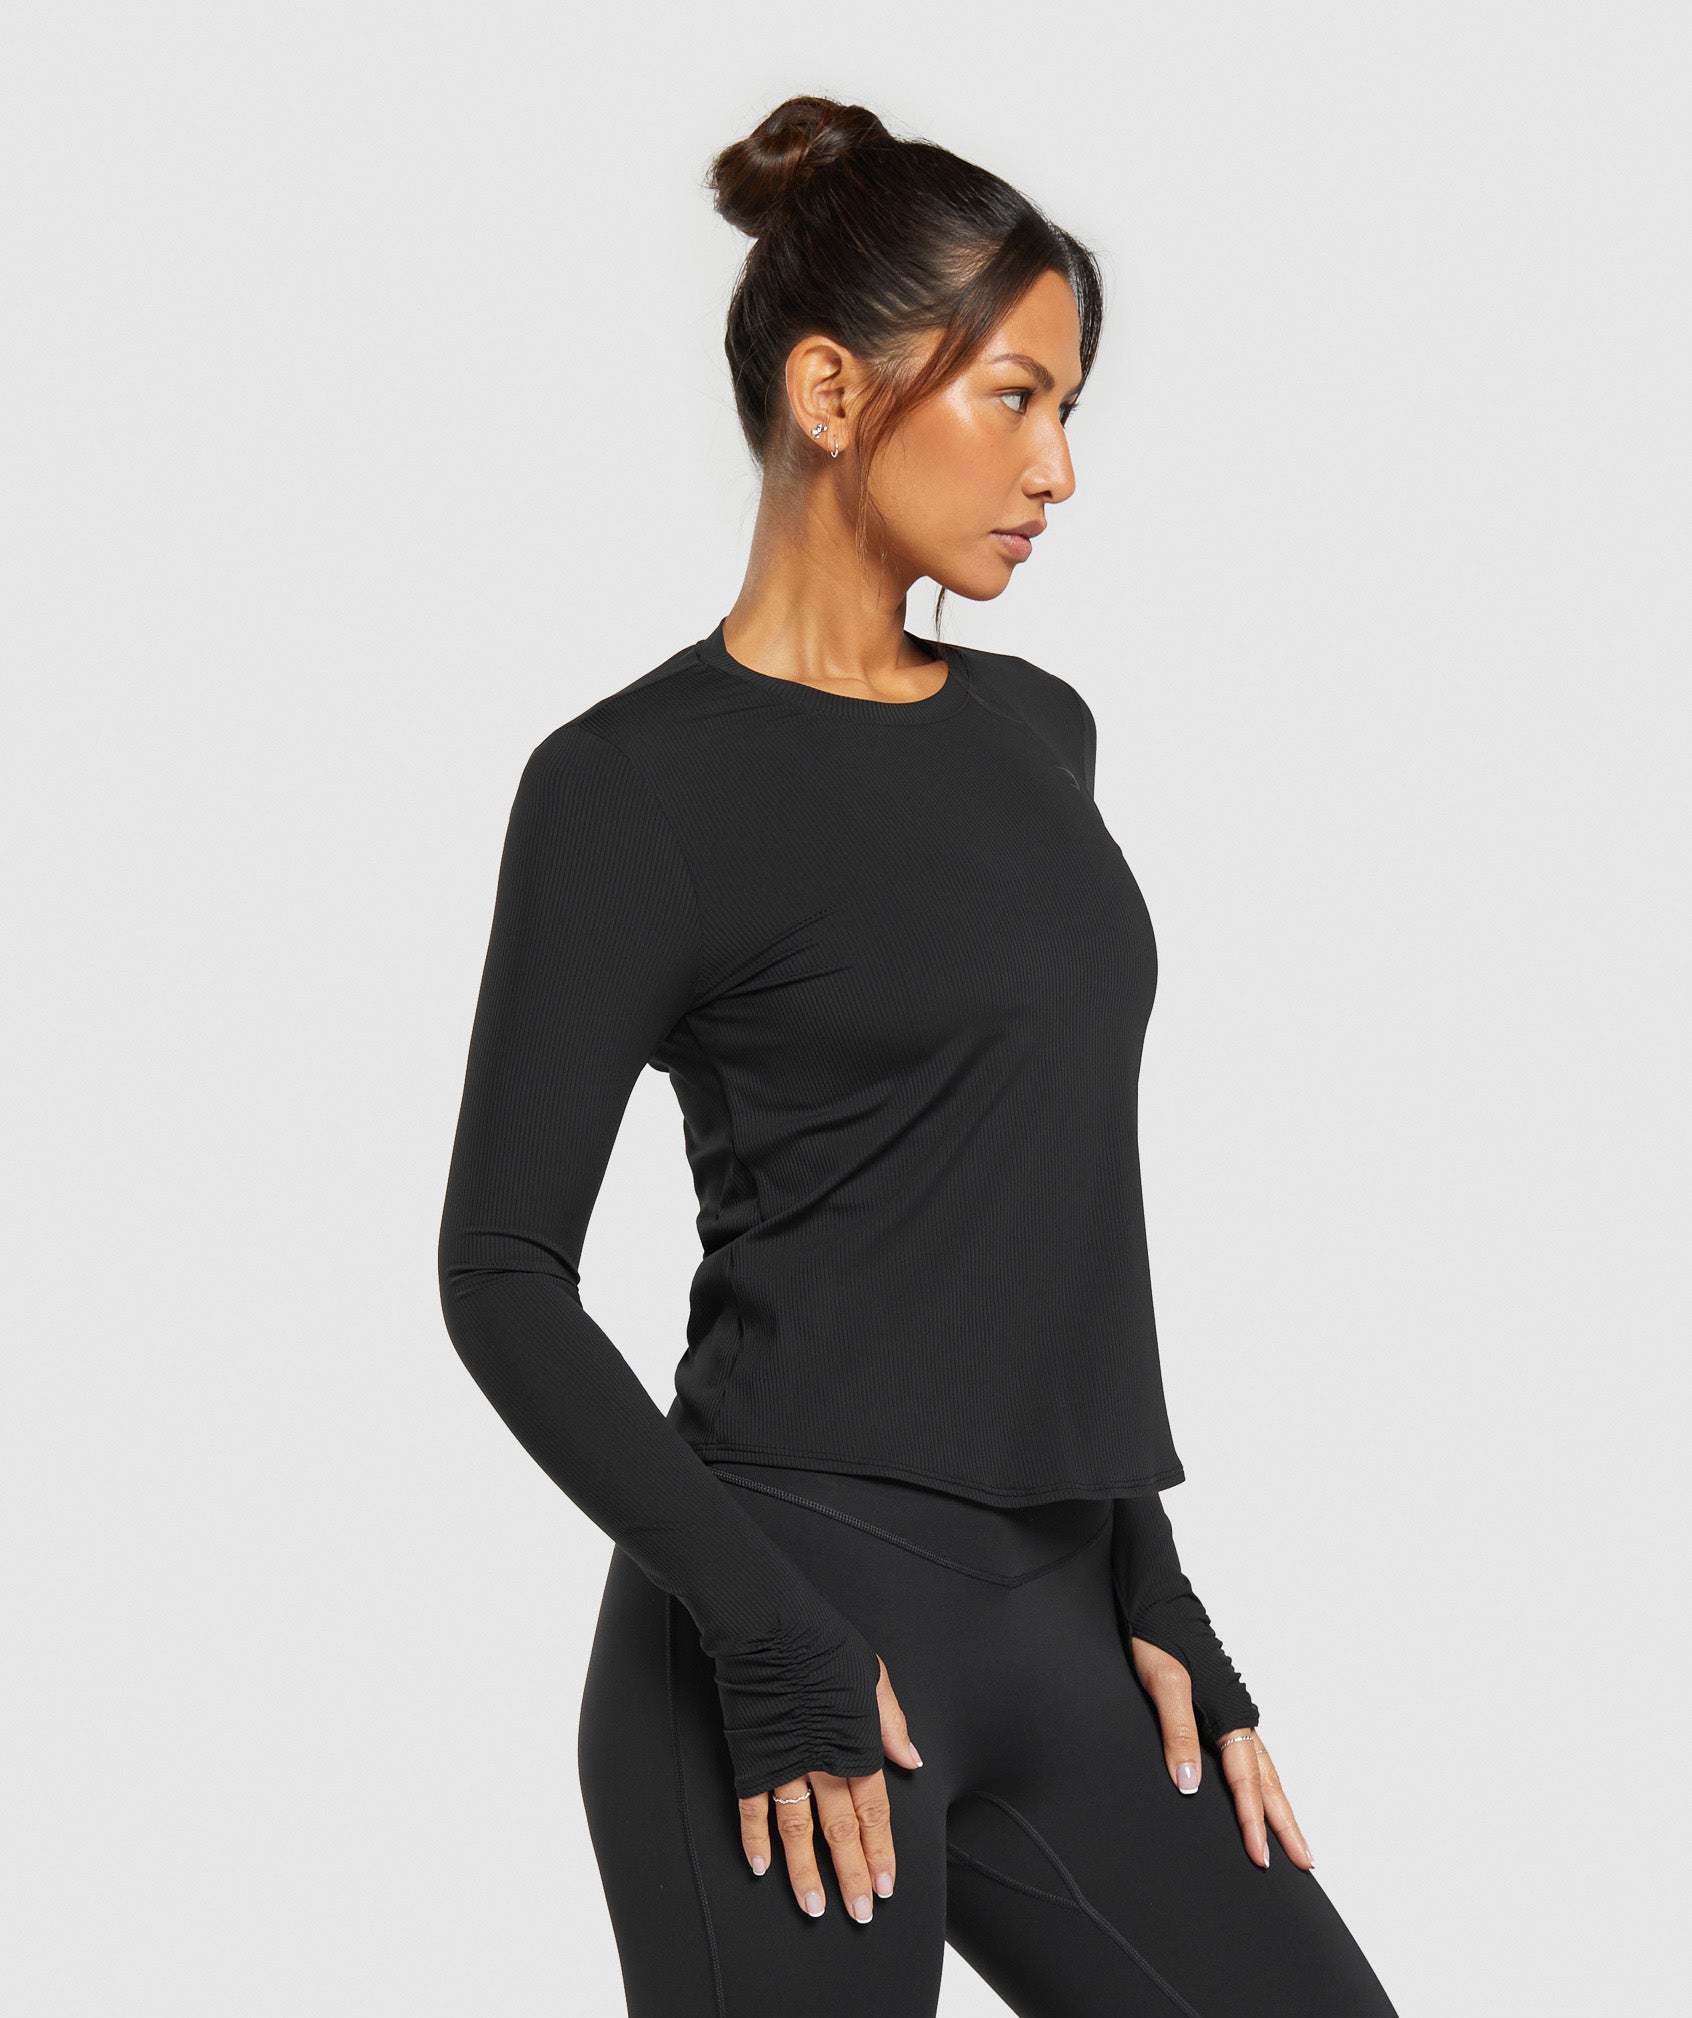 Elevate Long Sleeve Ruched Top in Black - view 3